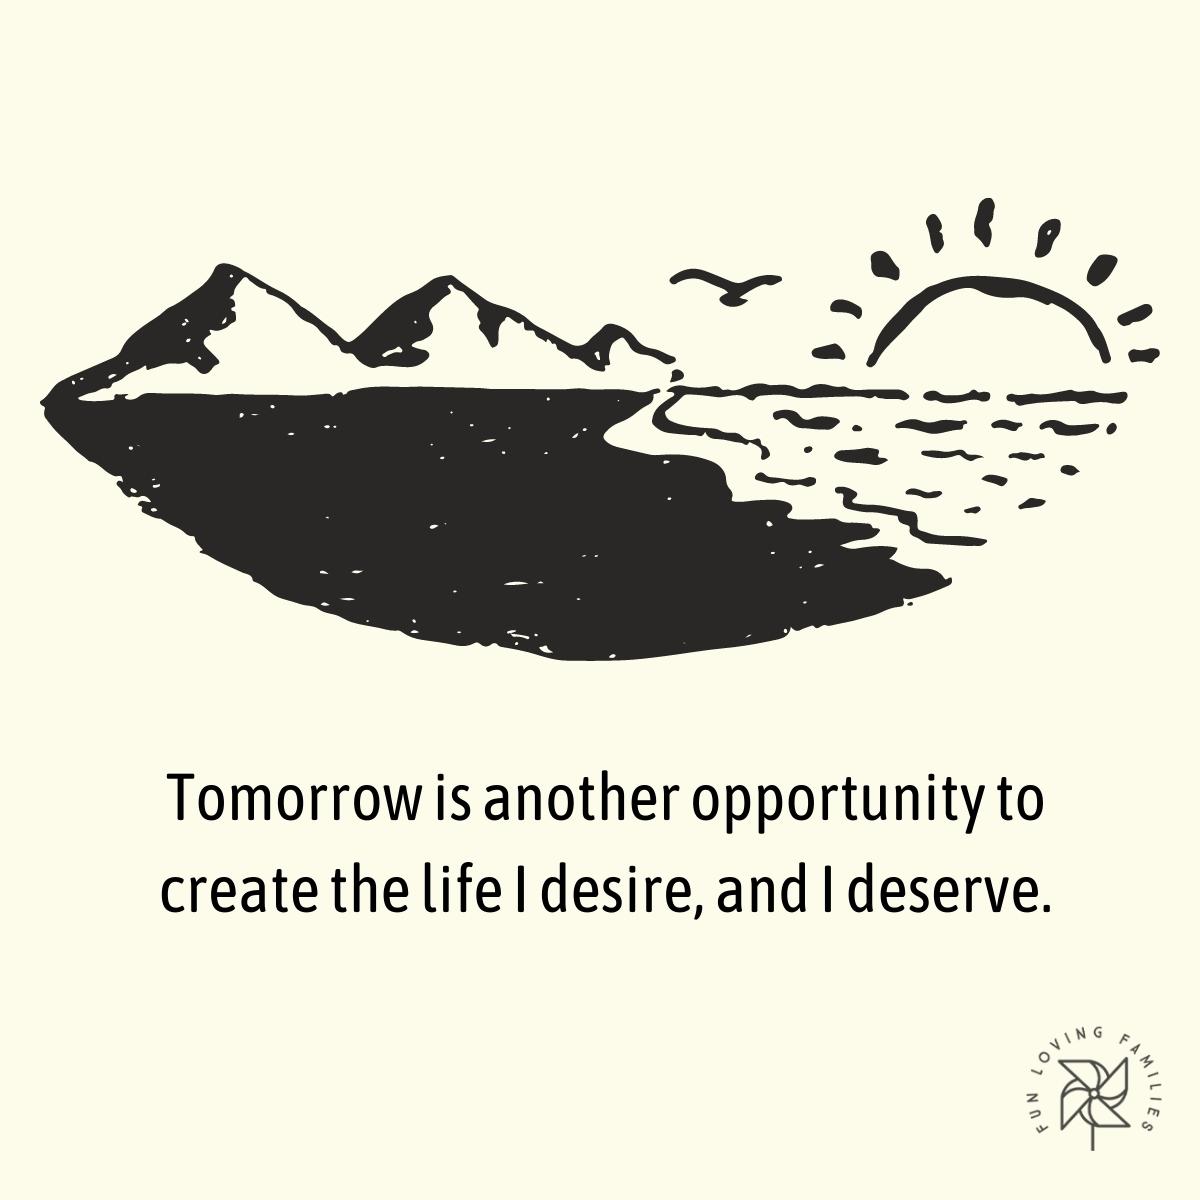 Tomorrow is another opportunity to create the life I desire, and I deserve affirmation